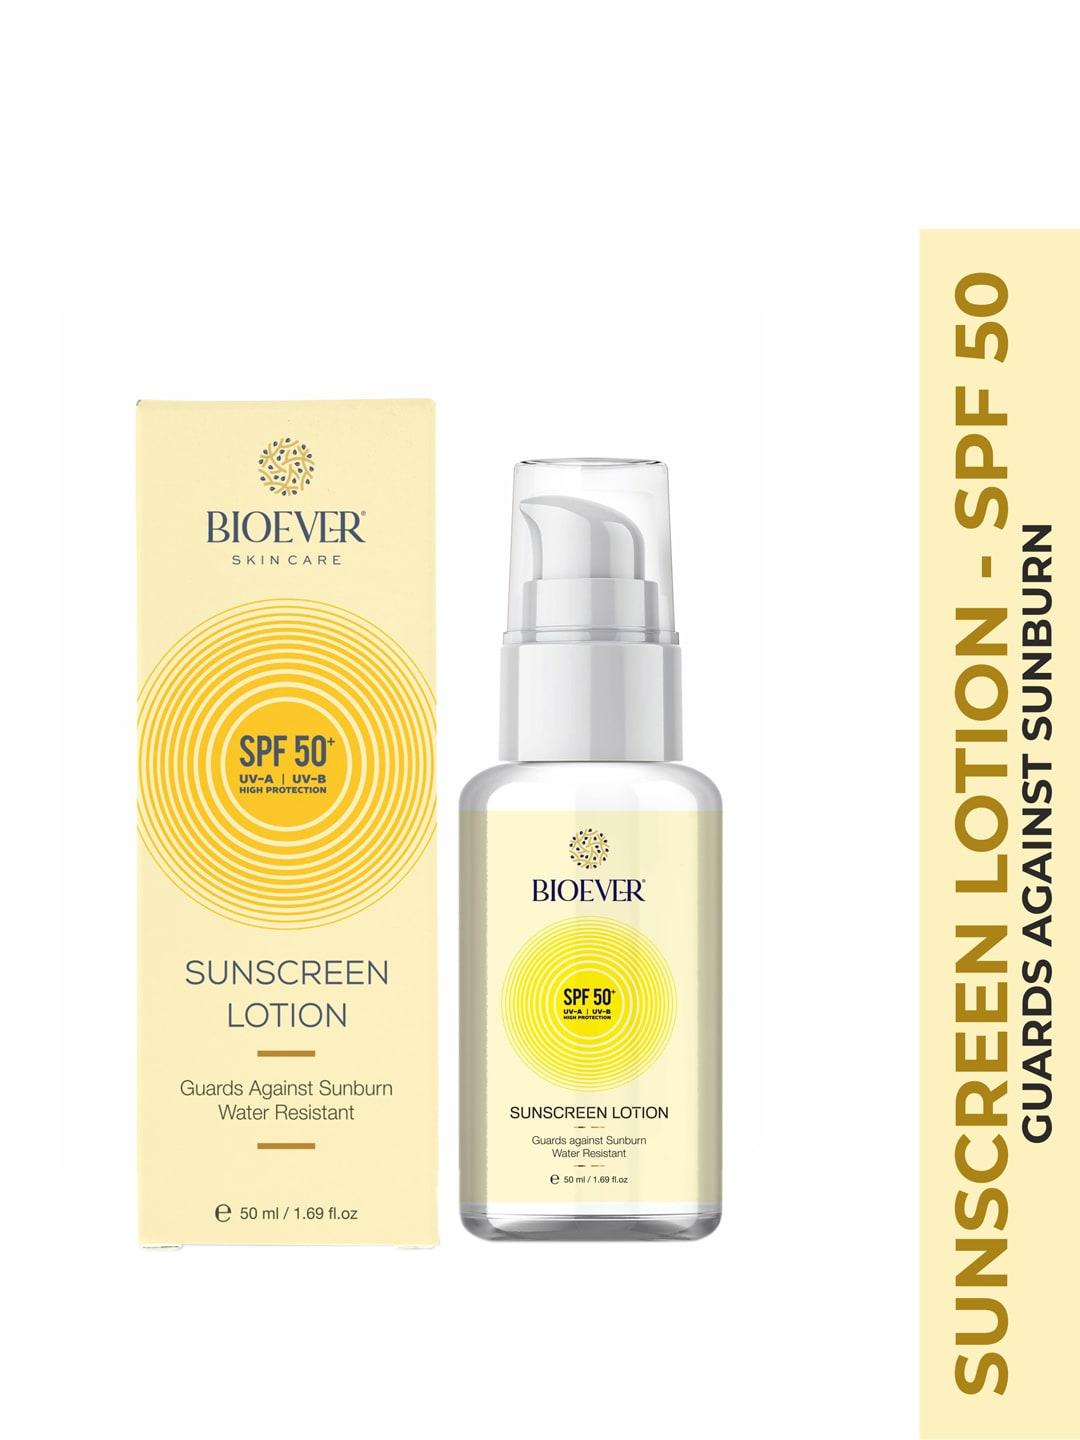 BIOEVER SPF 50 Water-Resistant Sunscreen Lotion - 50 ml